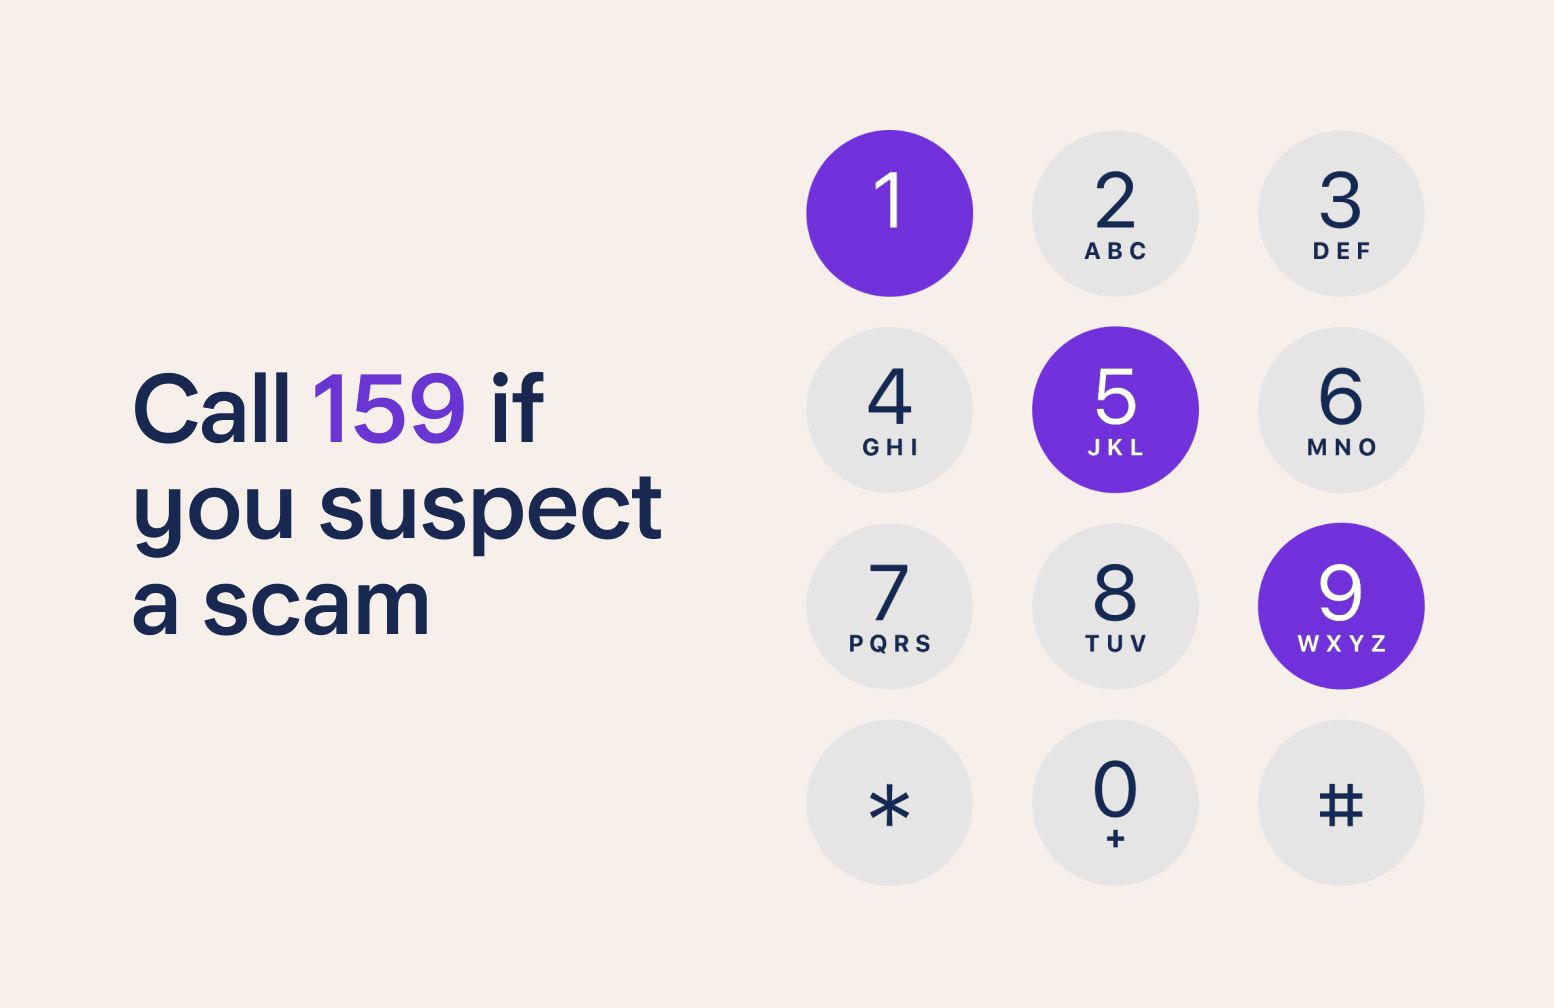 Text saying "Call 159 if you suspect a scam" net to an image of a keypad with the numbers 1, 5 and 9 coloured in purple